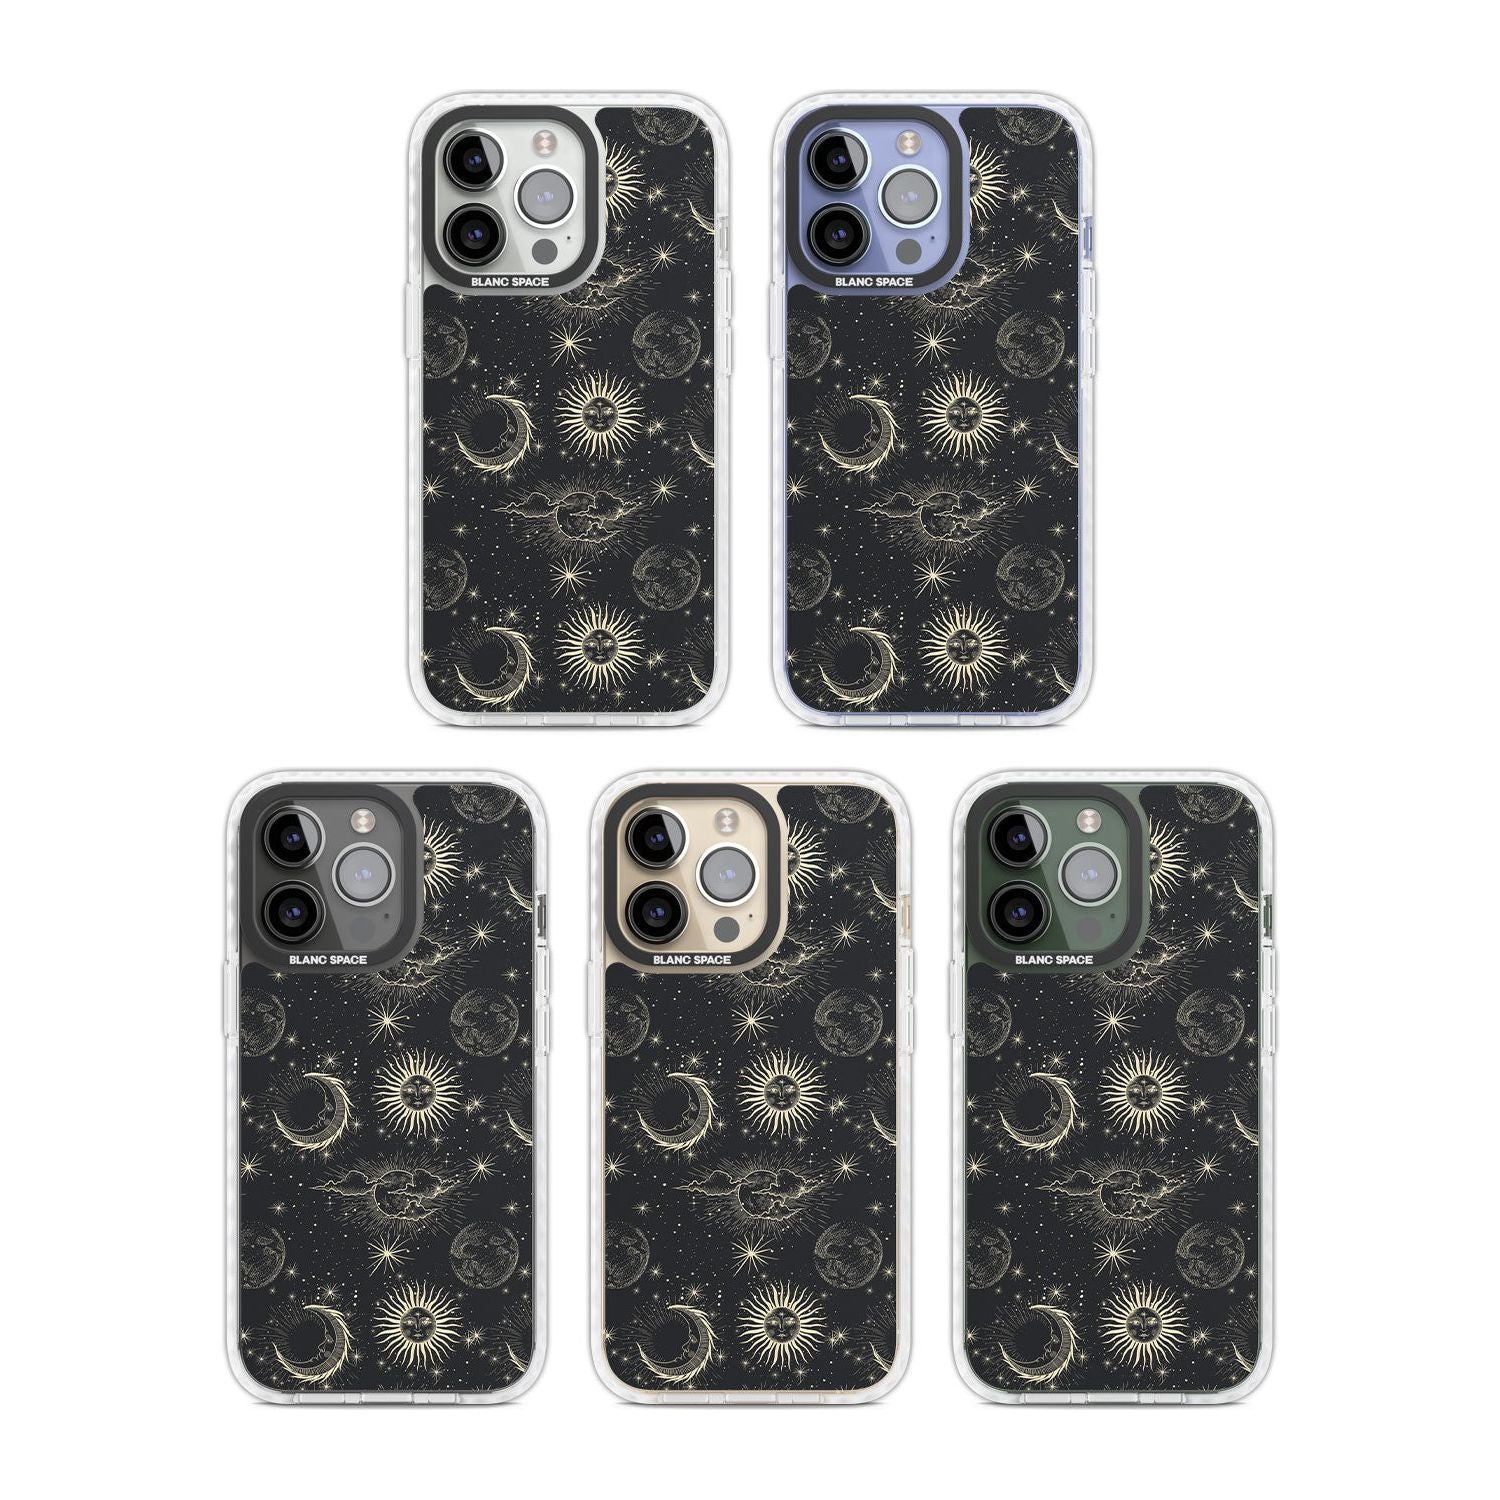 Large Suns, Moons & Clouds Astrological Phone Case iPhone 15 Pro Max / Black Impact Case,iPhone 15 Plus / Black Impact Case,iPhone 15 Pro / Black Impact Case,iPhone 15 / Black Impact Case,iPhone 15 Pro Max / Impact Case,iPhone 15 Plus / Impact Case,iPhone 15 Pro / Impact Case,iPhone 15 / Impact Case,iPhone 15 Pro Max / Magsafe Black Impact Case,iPhone 15 Plus / Magsafe Black Impact Case,iPhone 15 Pro / Magsafe Black Impact Case,iPhone 15 / Magsafe Black Impact Case,iPhone 14 Pro Max / Black Impact Case,iPho